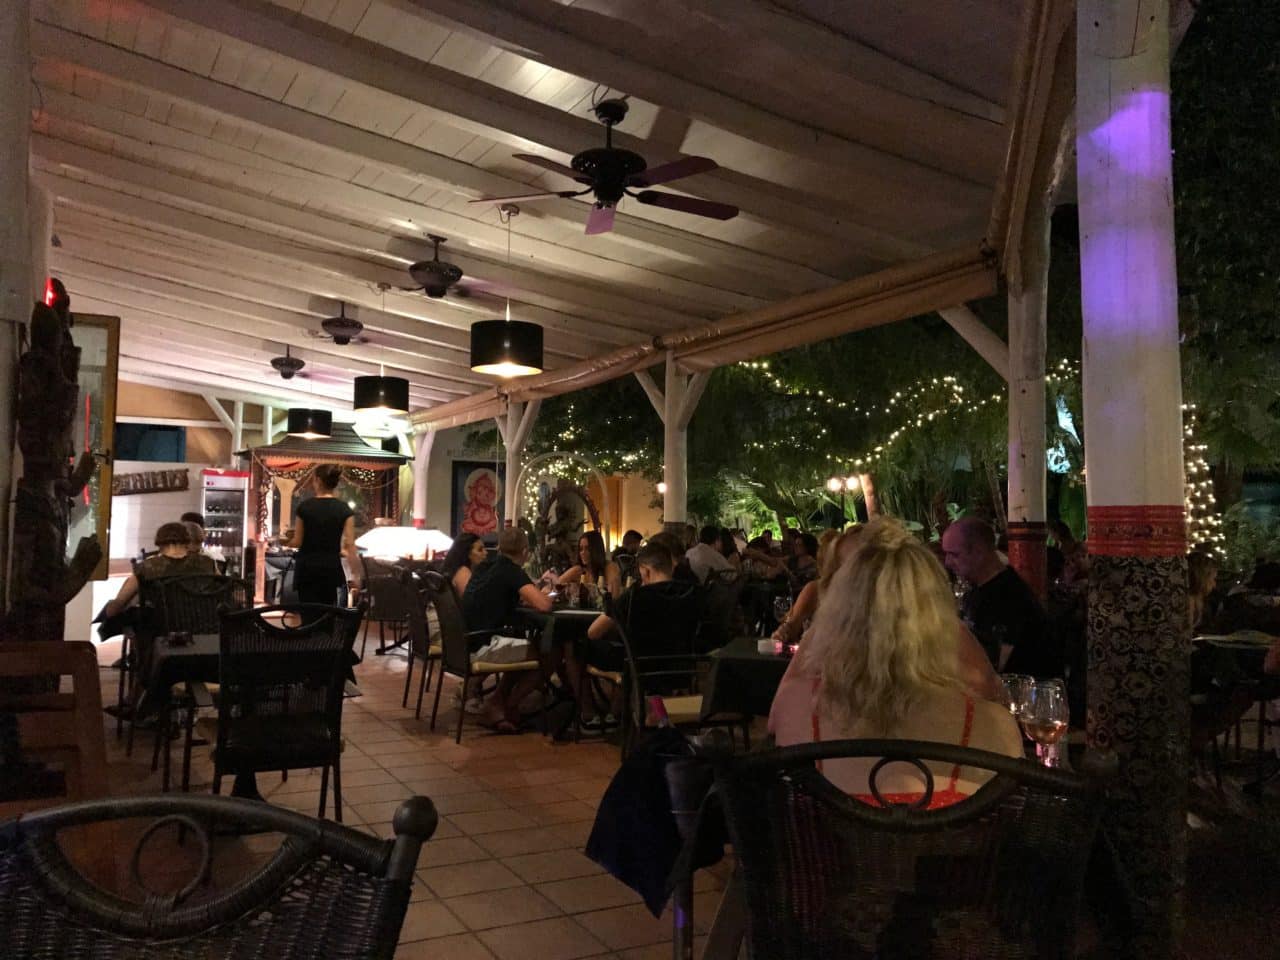 People Sitting In A Restaurant Eating With Fans And Lights